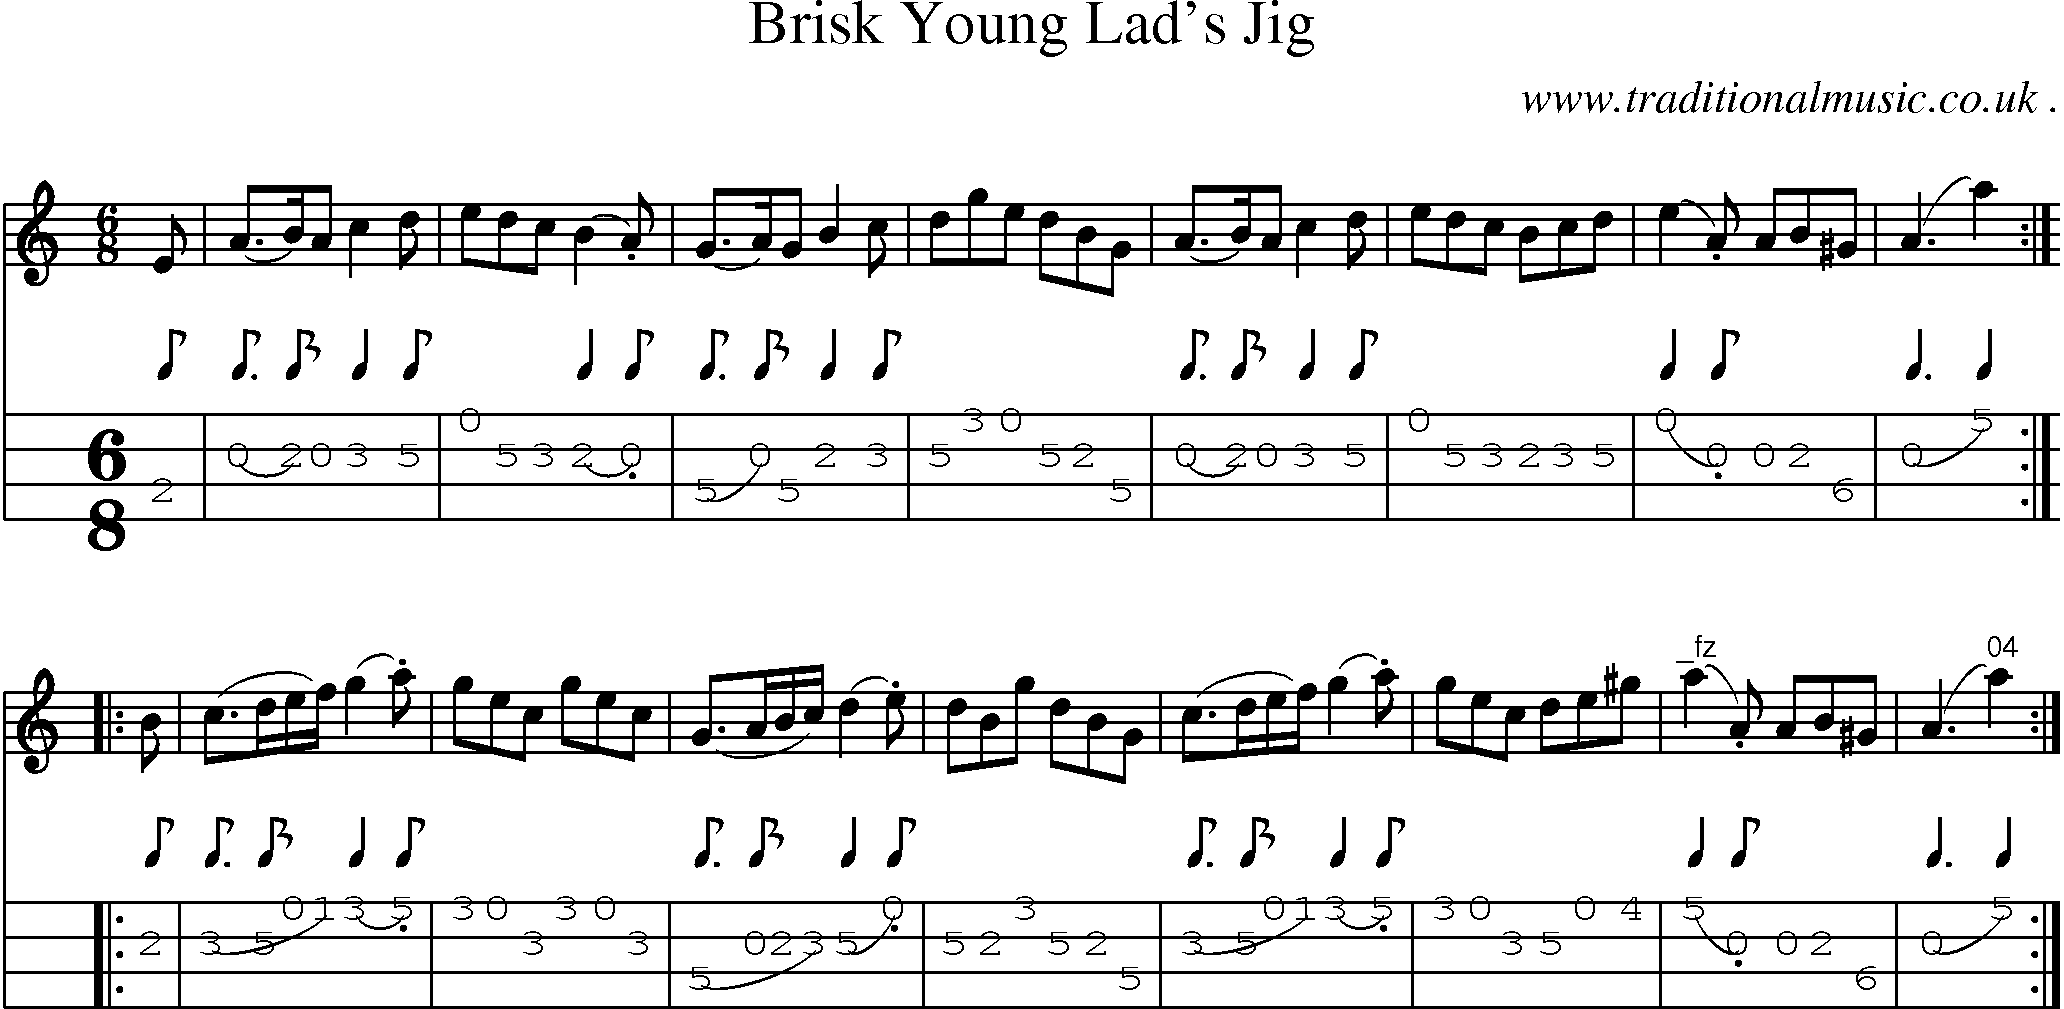 Sheet-Music and Mandolin Tabs for Brisk Young Lads Jig